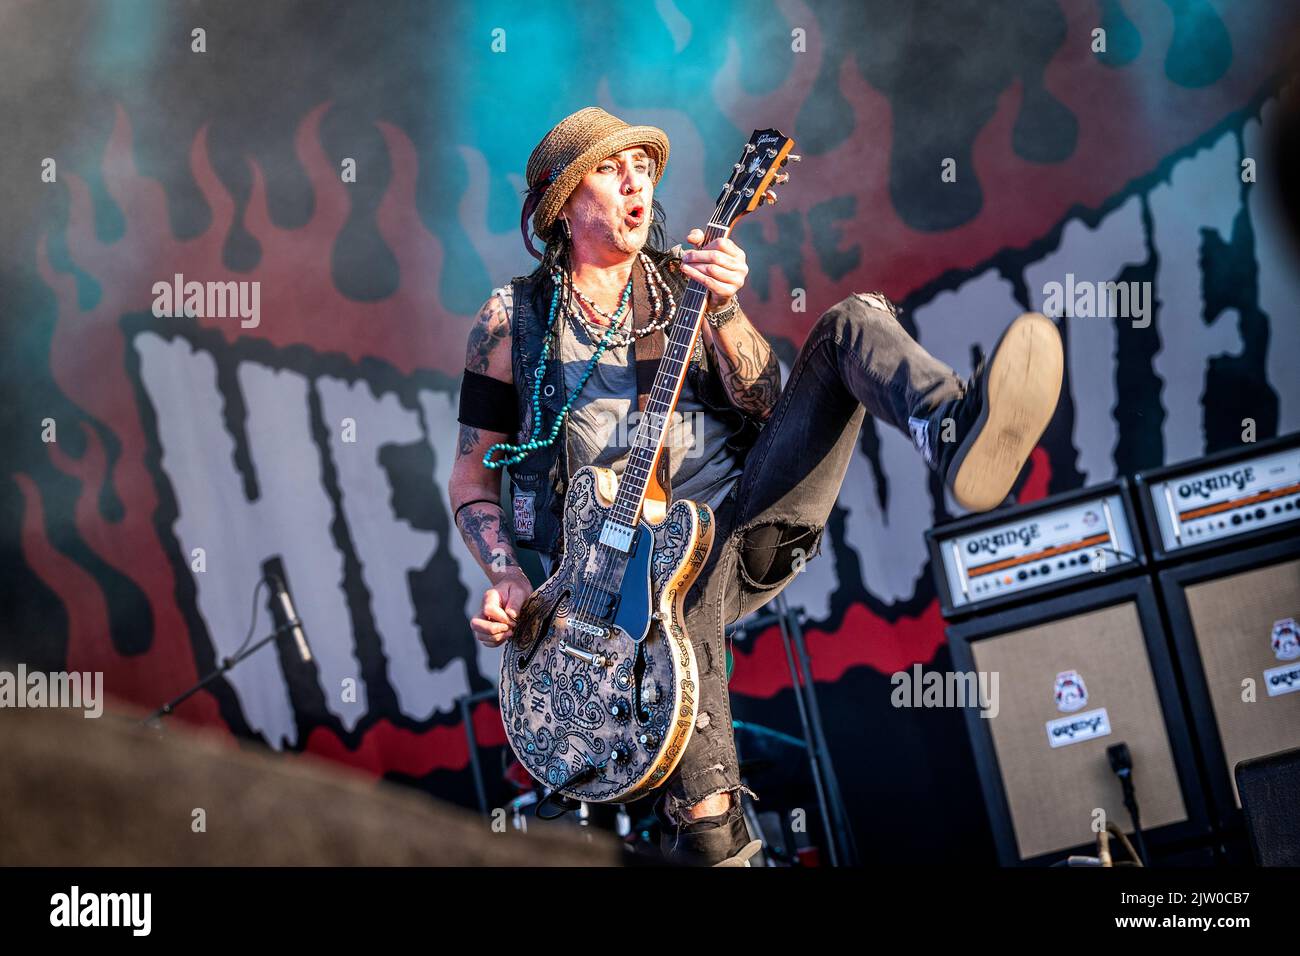 Solvesborg, Sweden. 10th, June 2022. The Swedish hard rock band The Hellacopters performs a live concert during the Swedish music festival Sweden Rock Festival 2022 in Solvesborg. Here guitarist Dregen is seen live on stage. (Photo credit: Gonzales Photo - Terje Dokken). Stock Photo